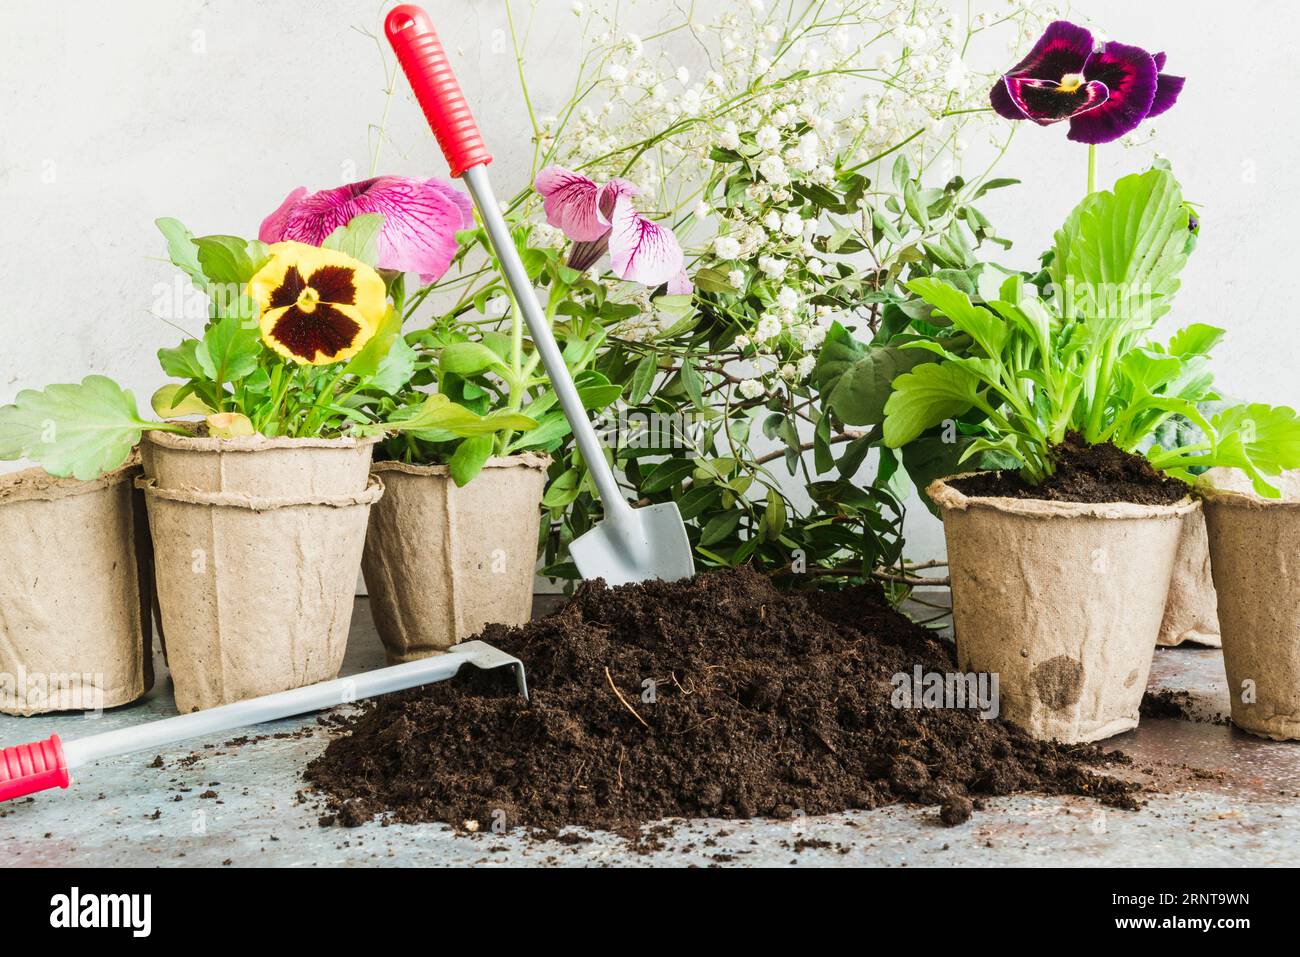 Gardening tools soil with peat potted plants Stock Photo